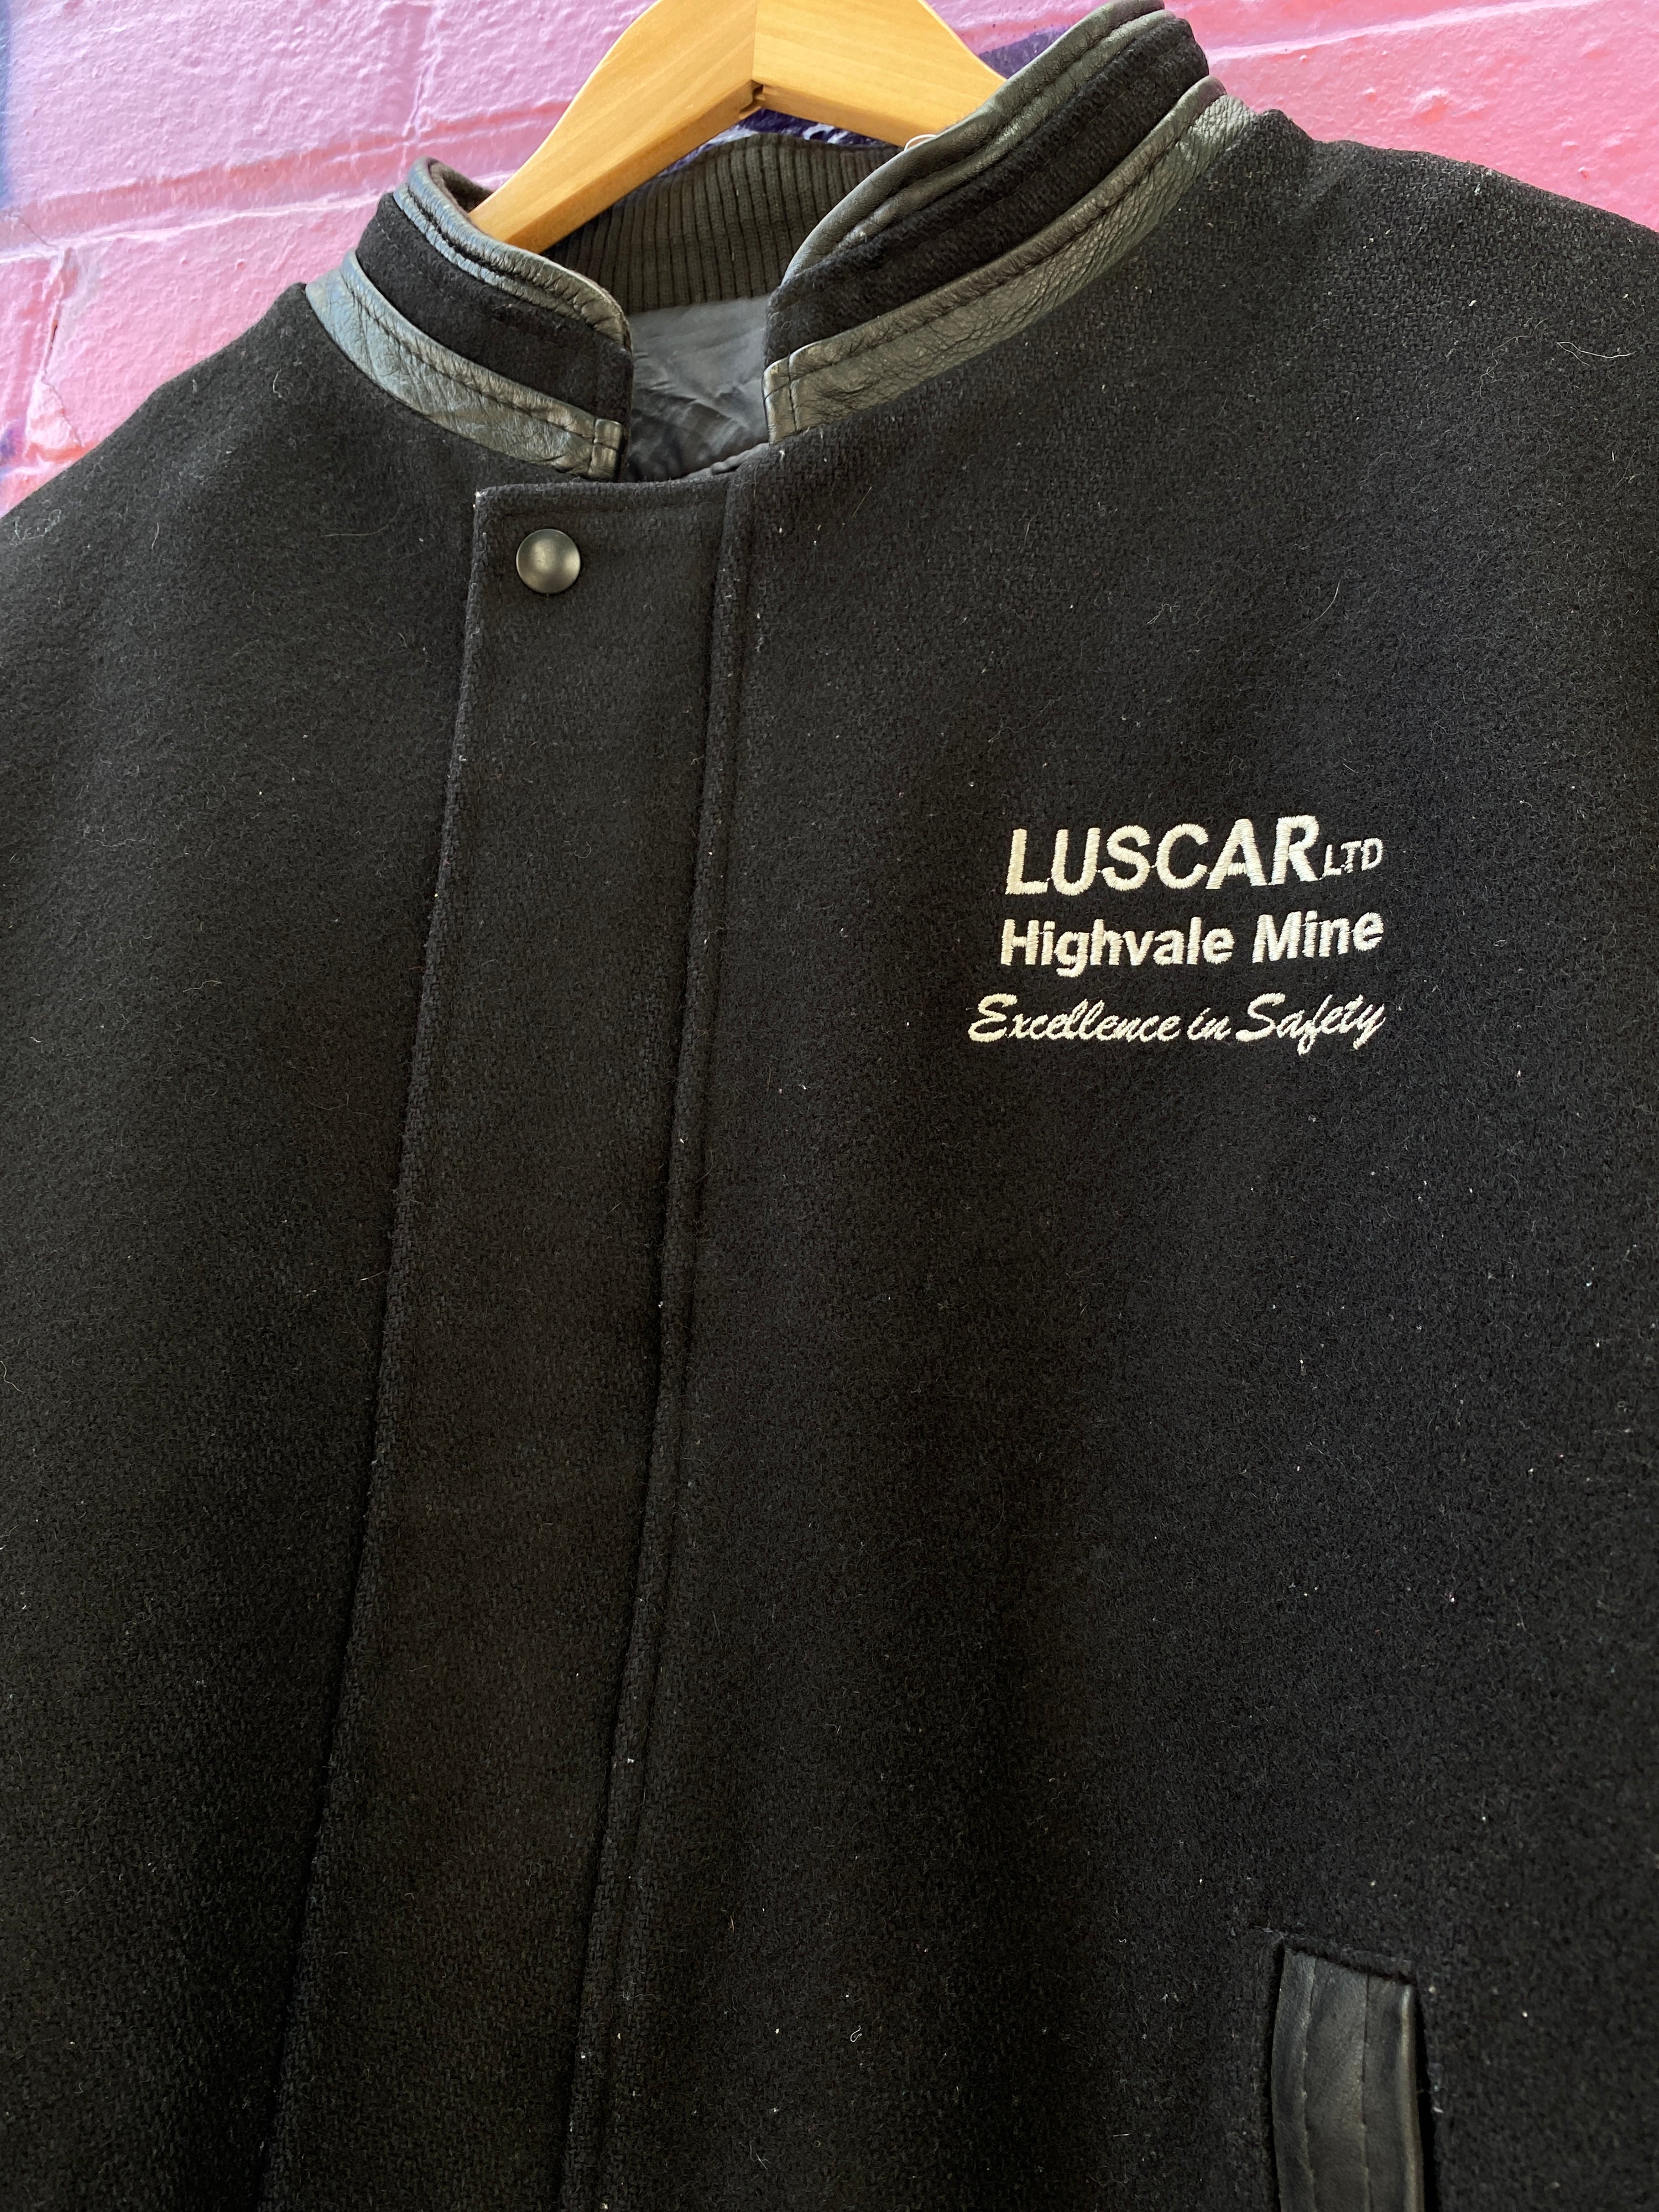 M - Vintage LUSCAR 'Excellence in Safety' Varsity Jacket